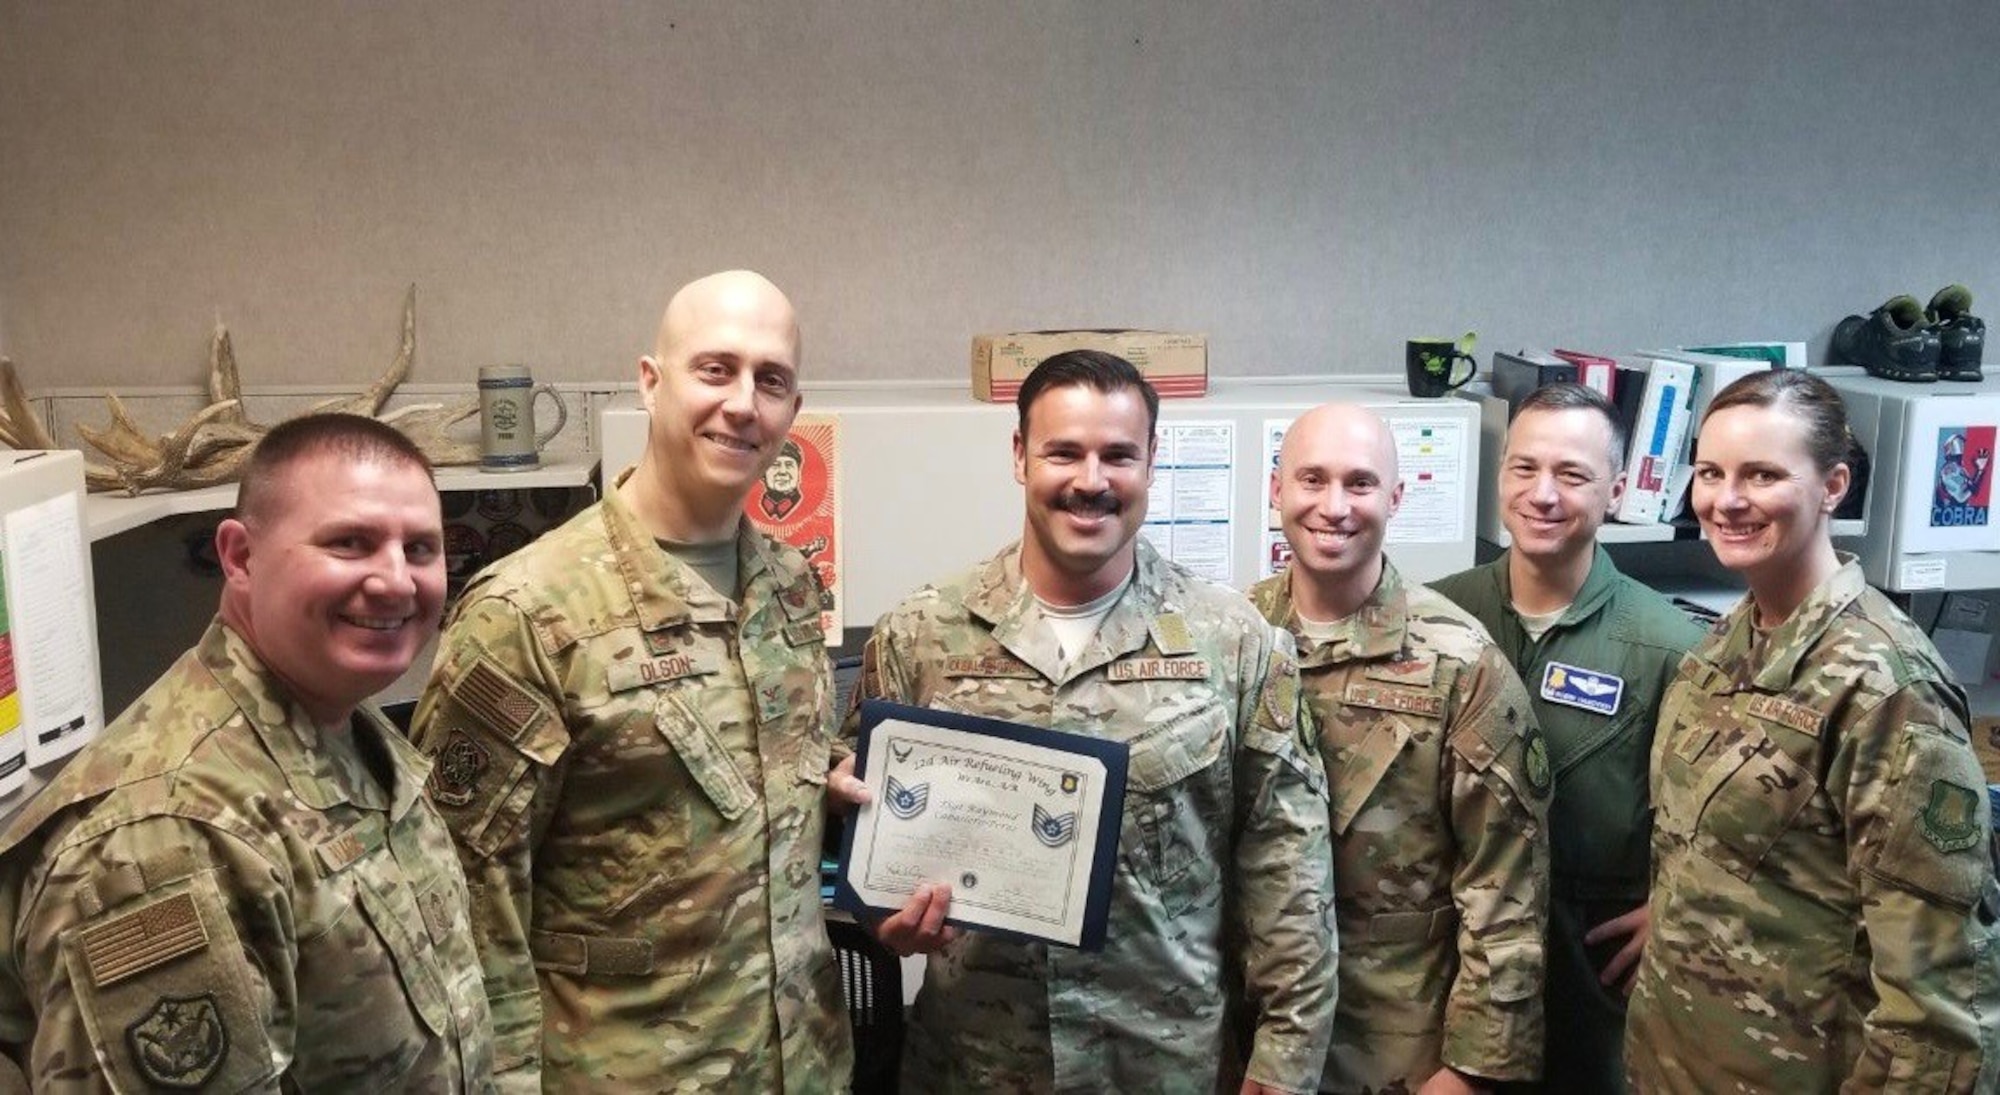 Staff Sgt. Raymond CaballeroPerez, 22nd Operations Support Squadron Survival, Evasion, Recovery and Escape operations and training NCO in charge, poses for a photo with wing leadership Dec. 19, 2018, at McConnell Air Force Base, Kansas. Perez was selected as an Air Mobility Command Stripes to Exceptional Performers promotee for his work as a SERE specialist. (Courtesy photo)